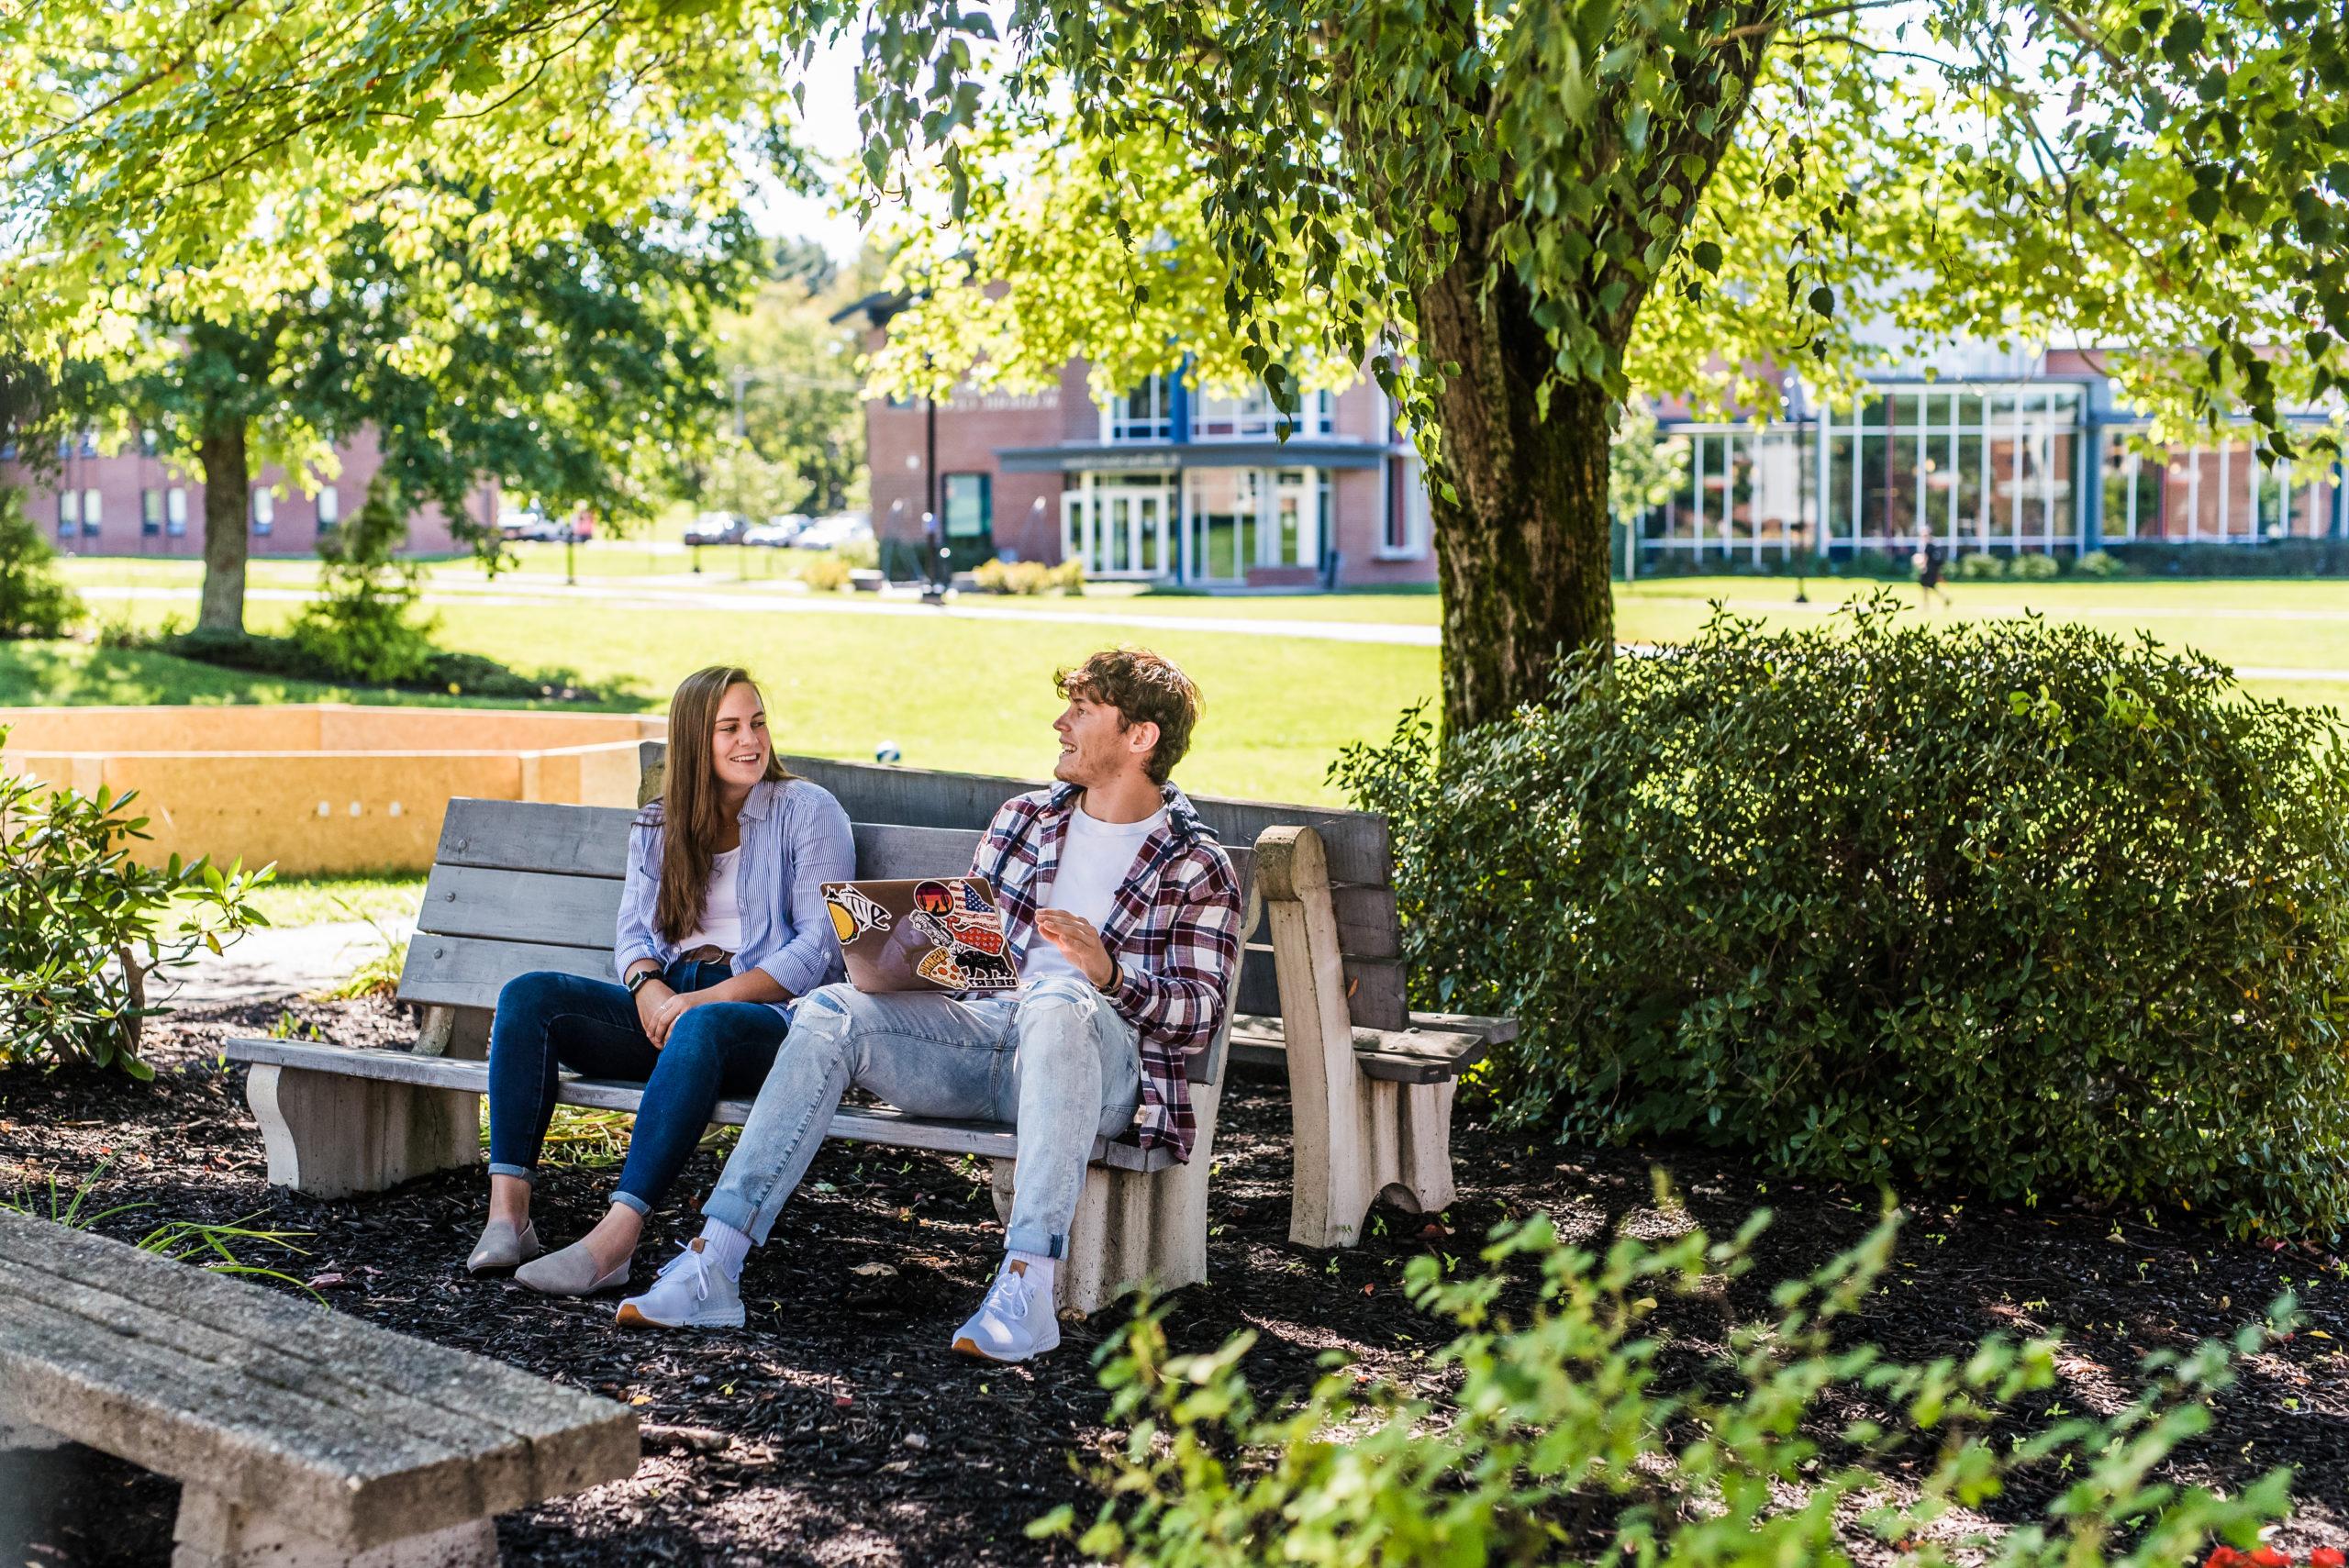 Students sitting on a bench